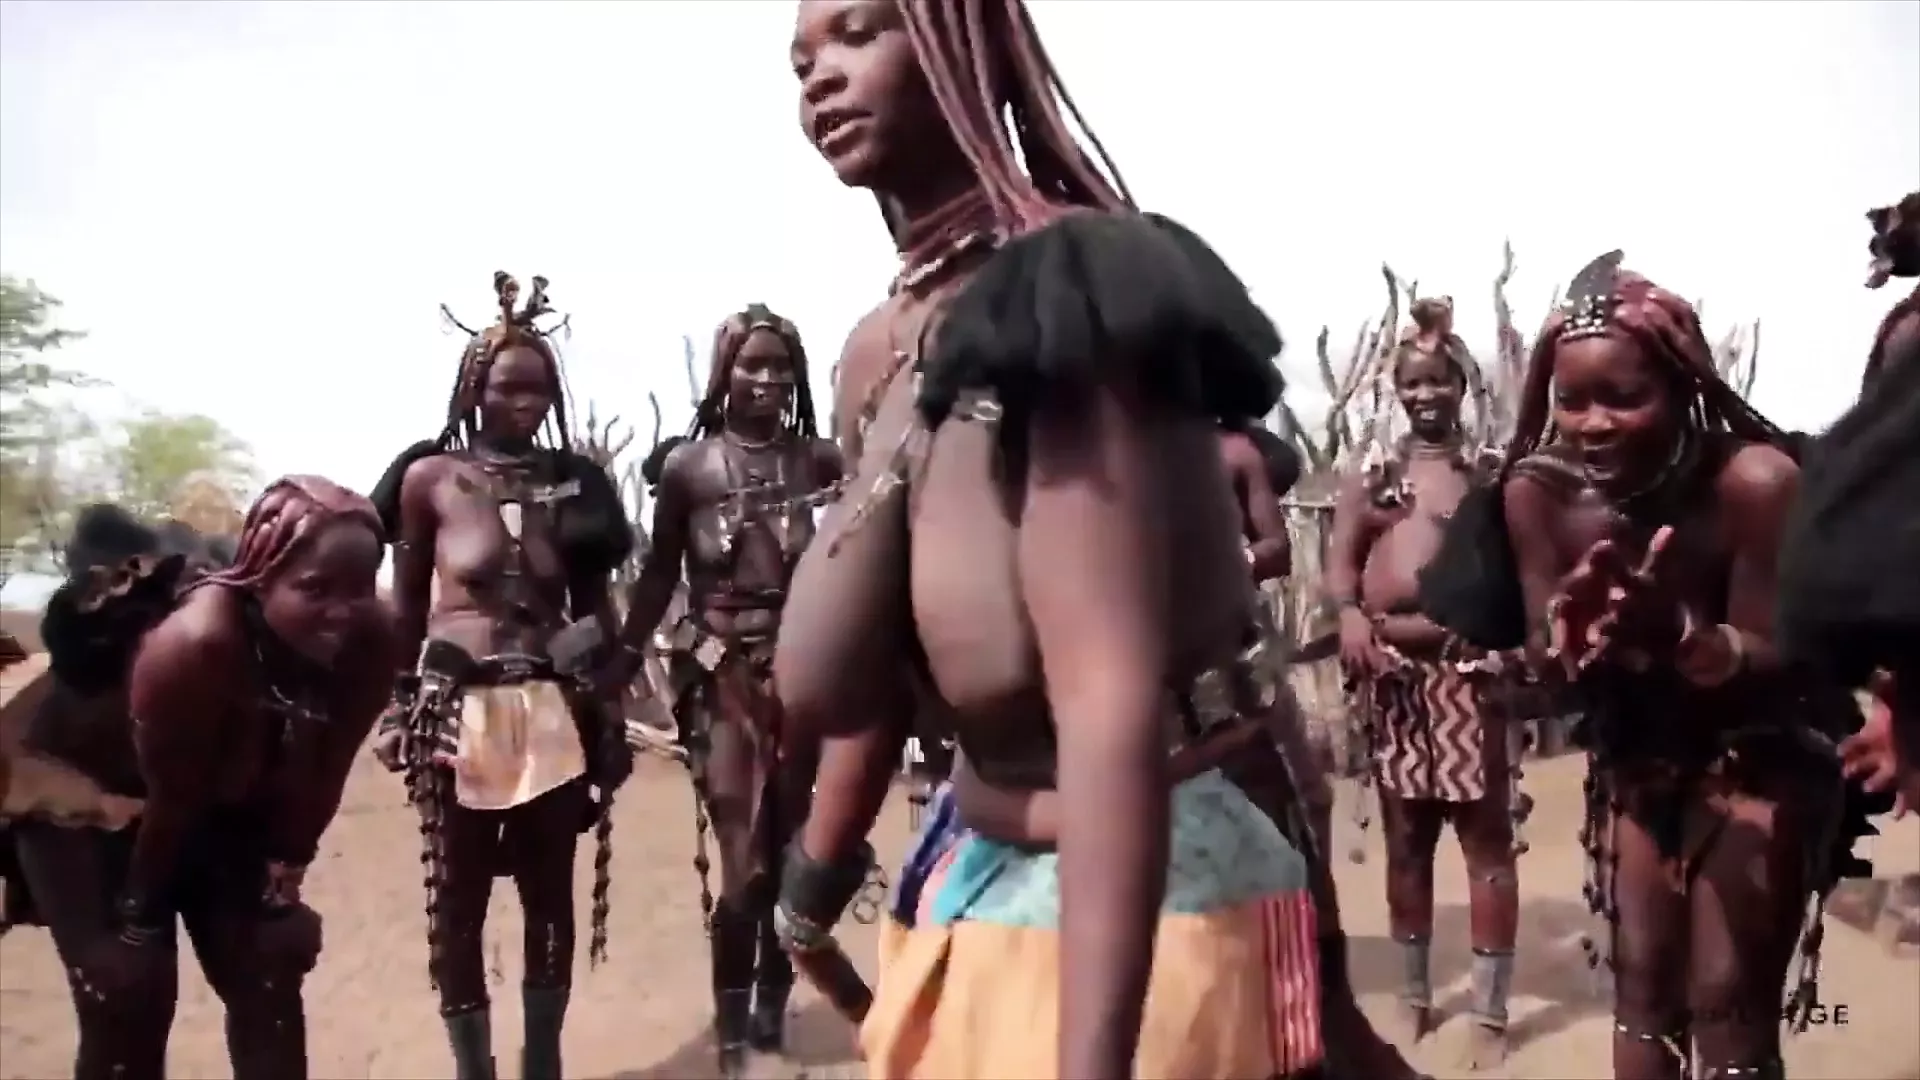 Tribal Dancing Black Men Having Gay Sex - African Himba Women Dance and Swing Their Saggy Tits Around | xHamster